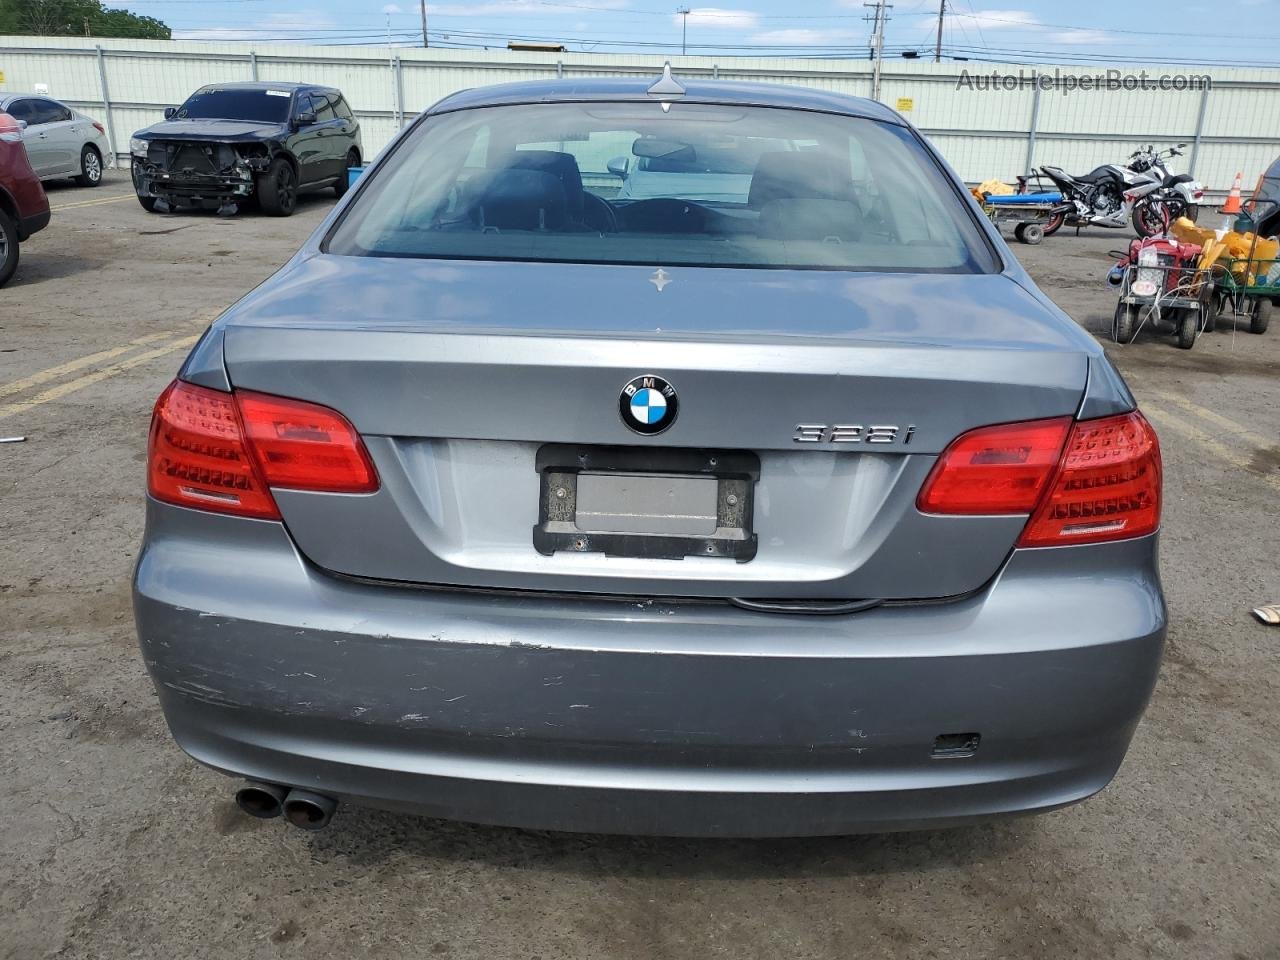 2011 Bmw 328 Xi Sulev Gray vin: WBAKF5C55BE586418